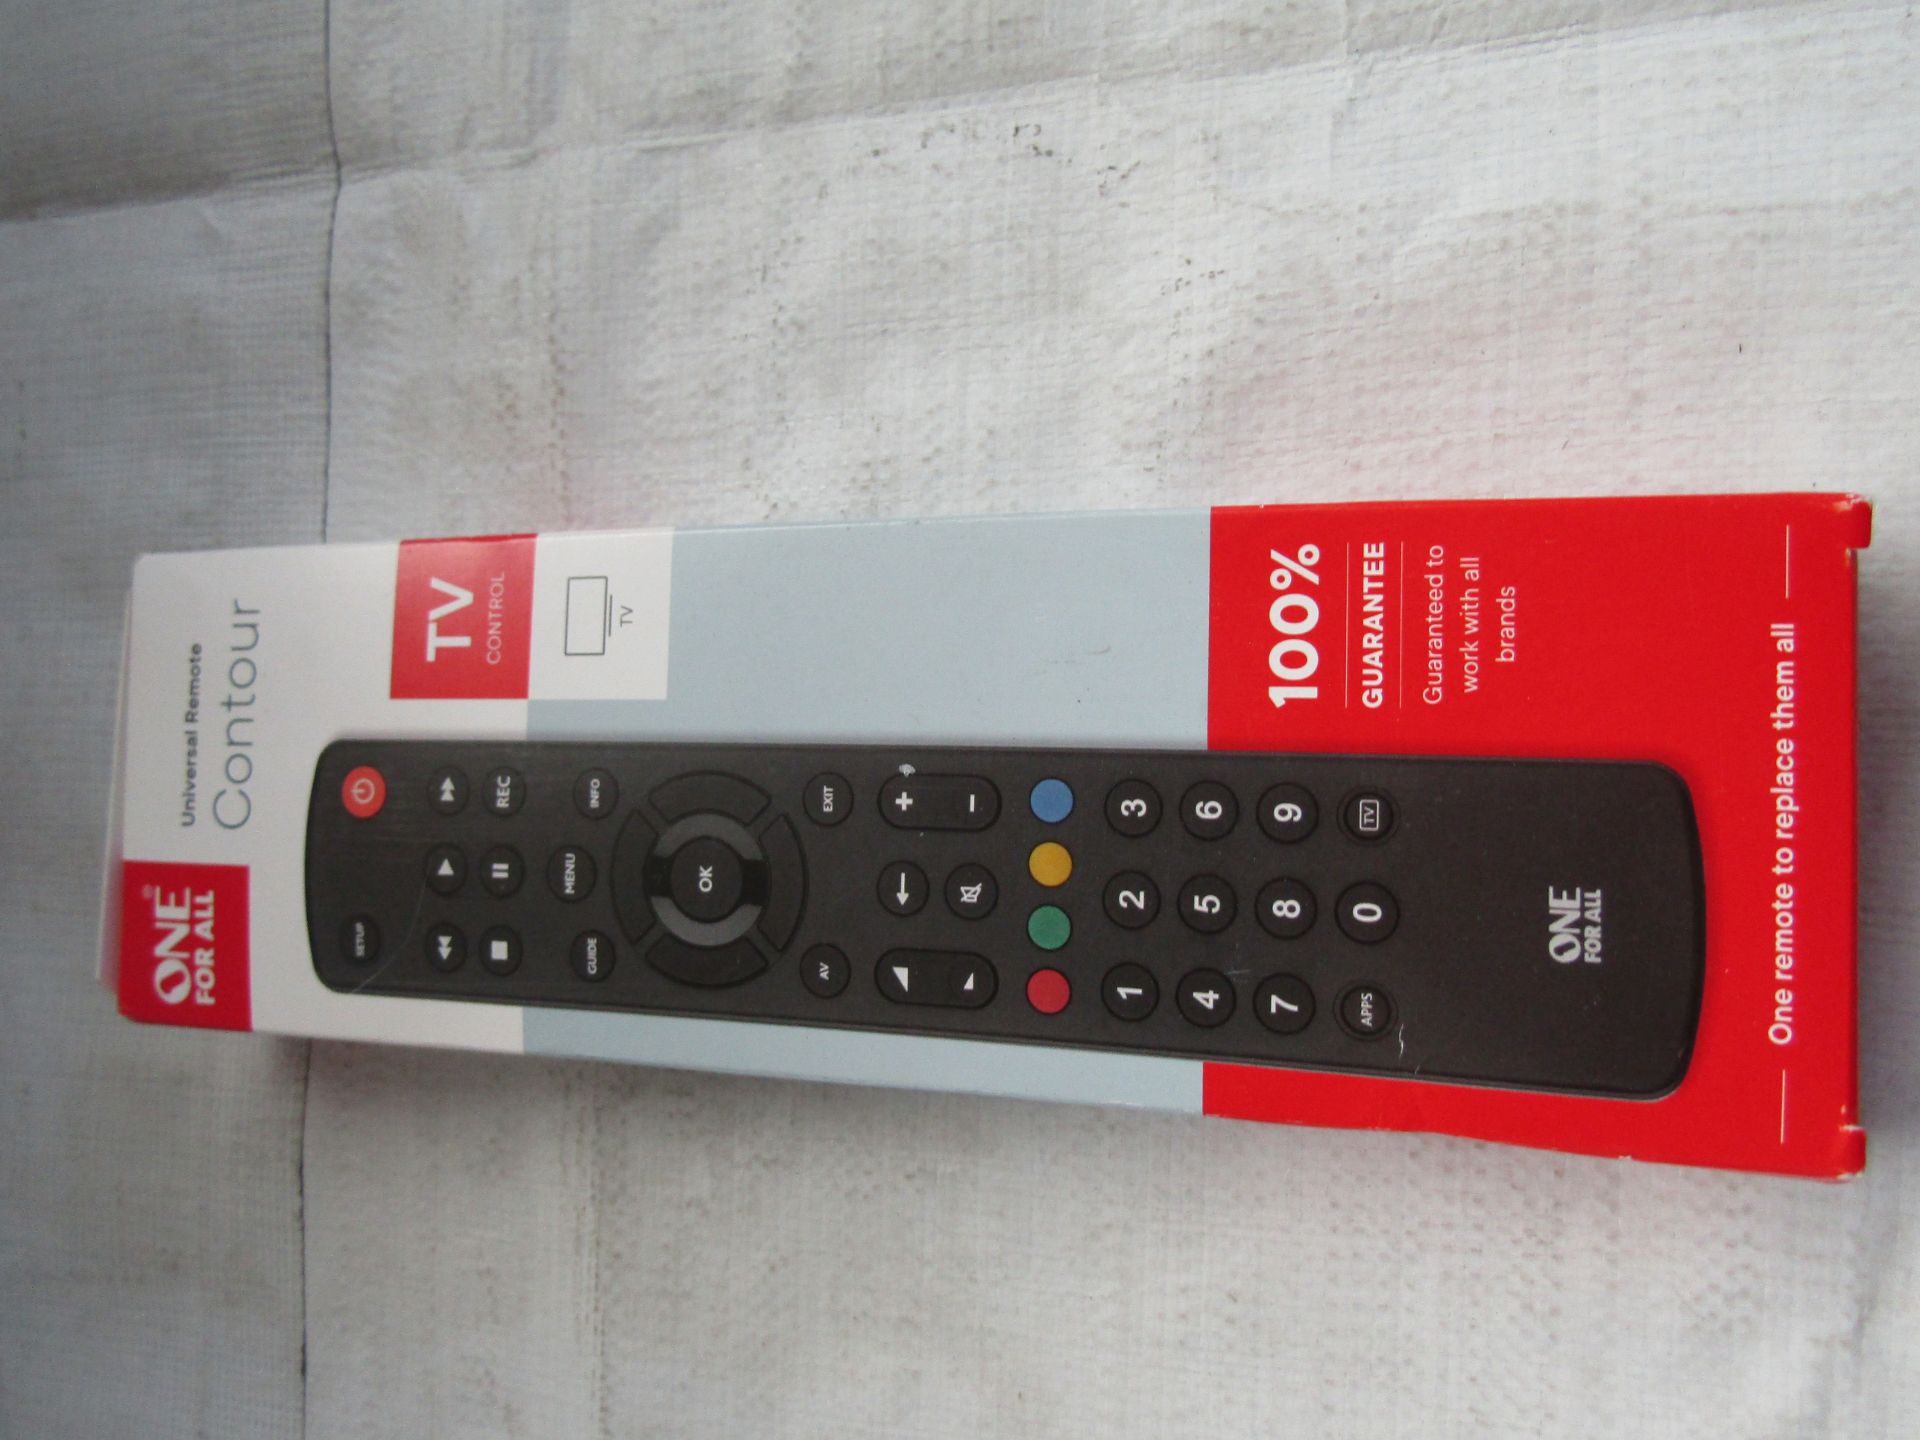 2x One For All Universal Remotes, Unchecked & Boxed.